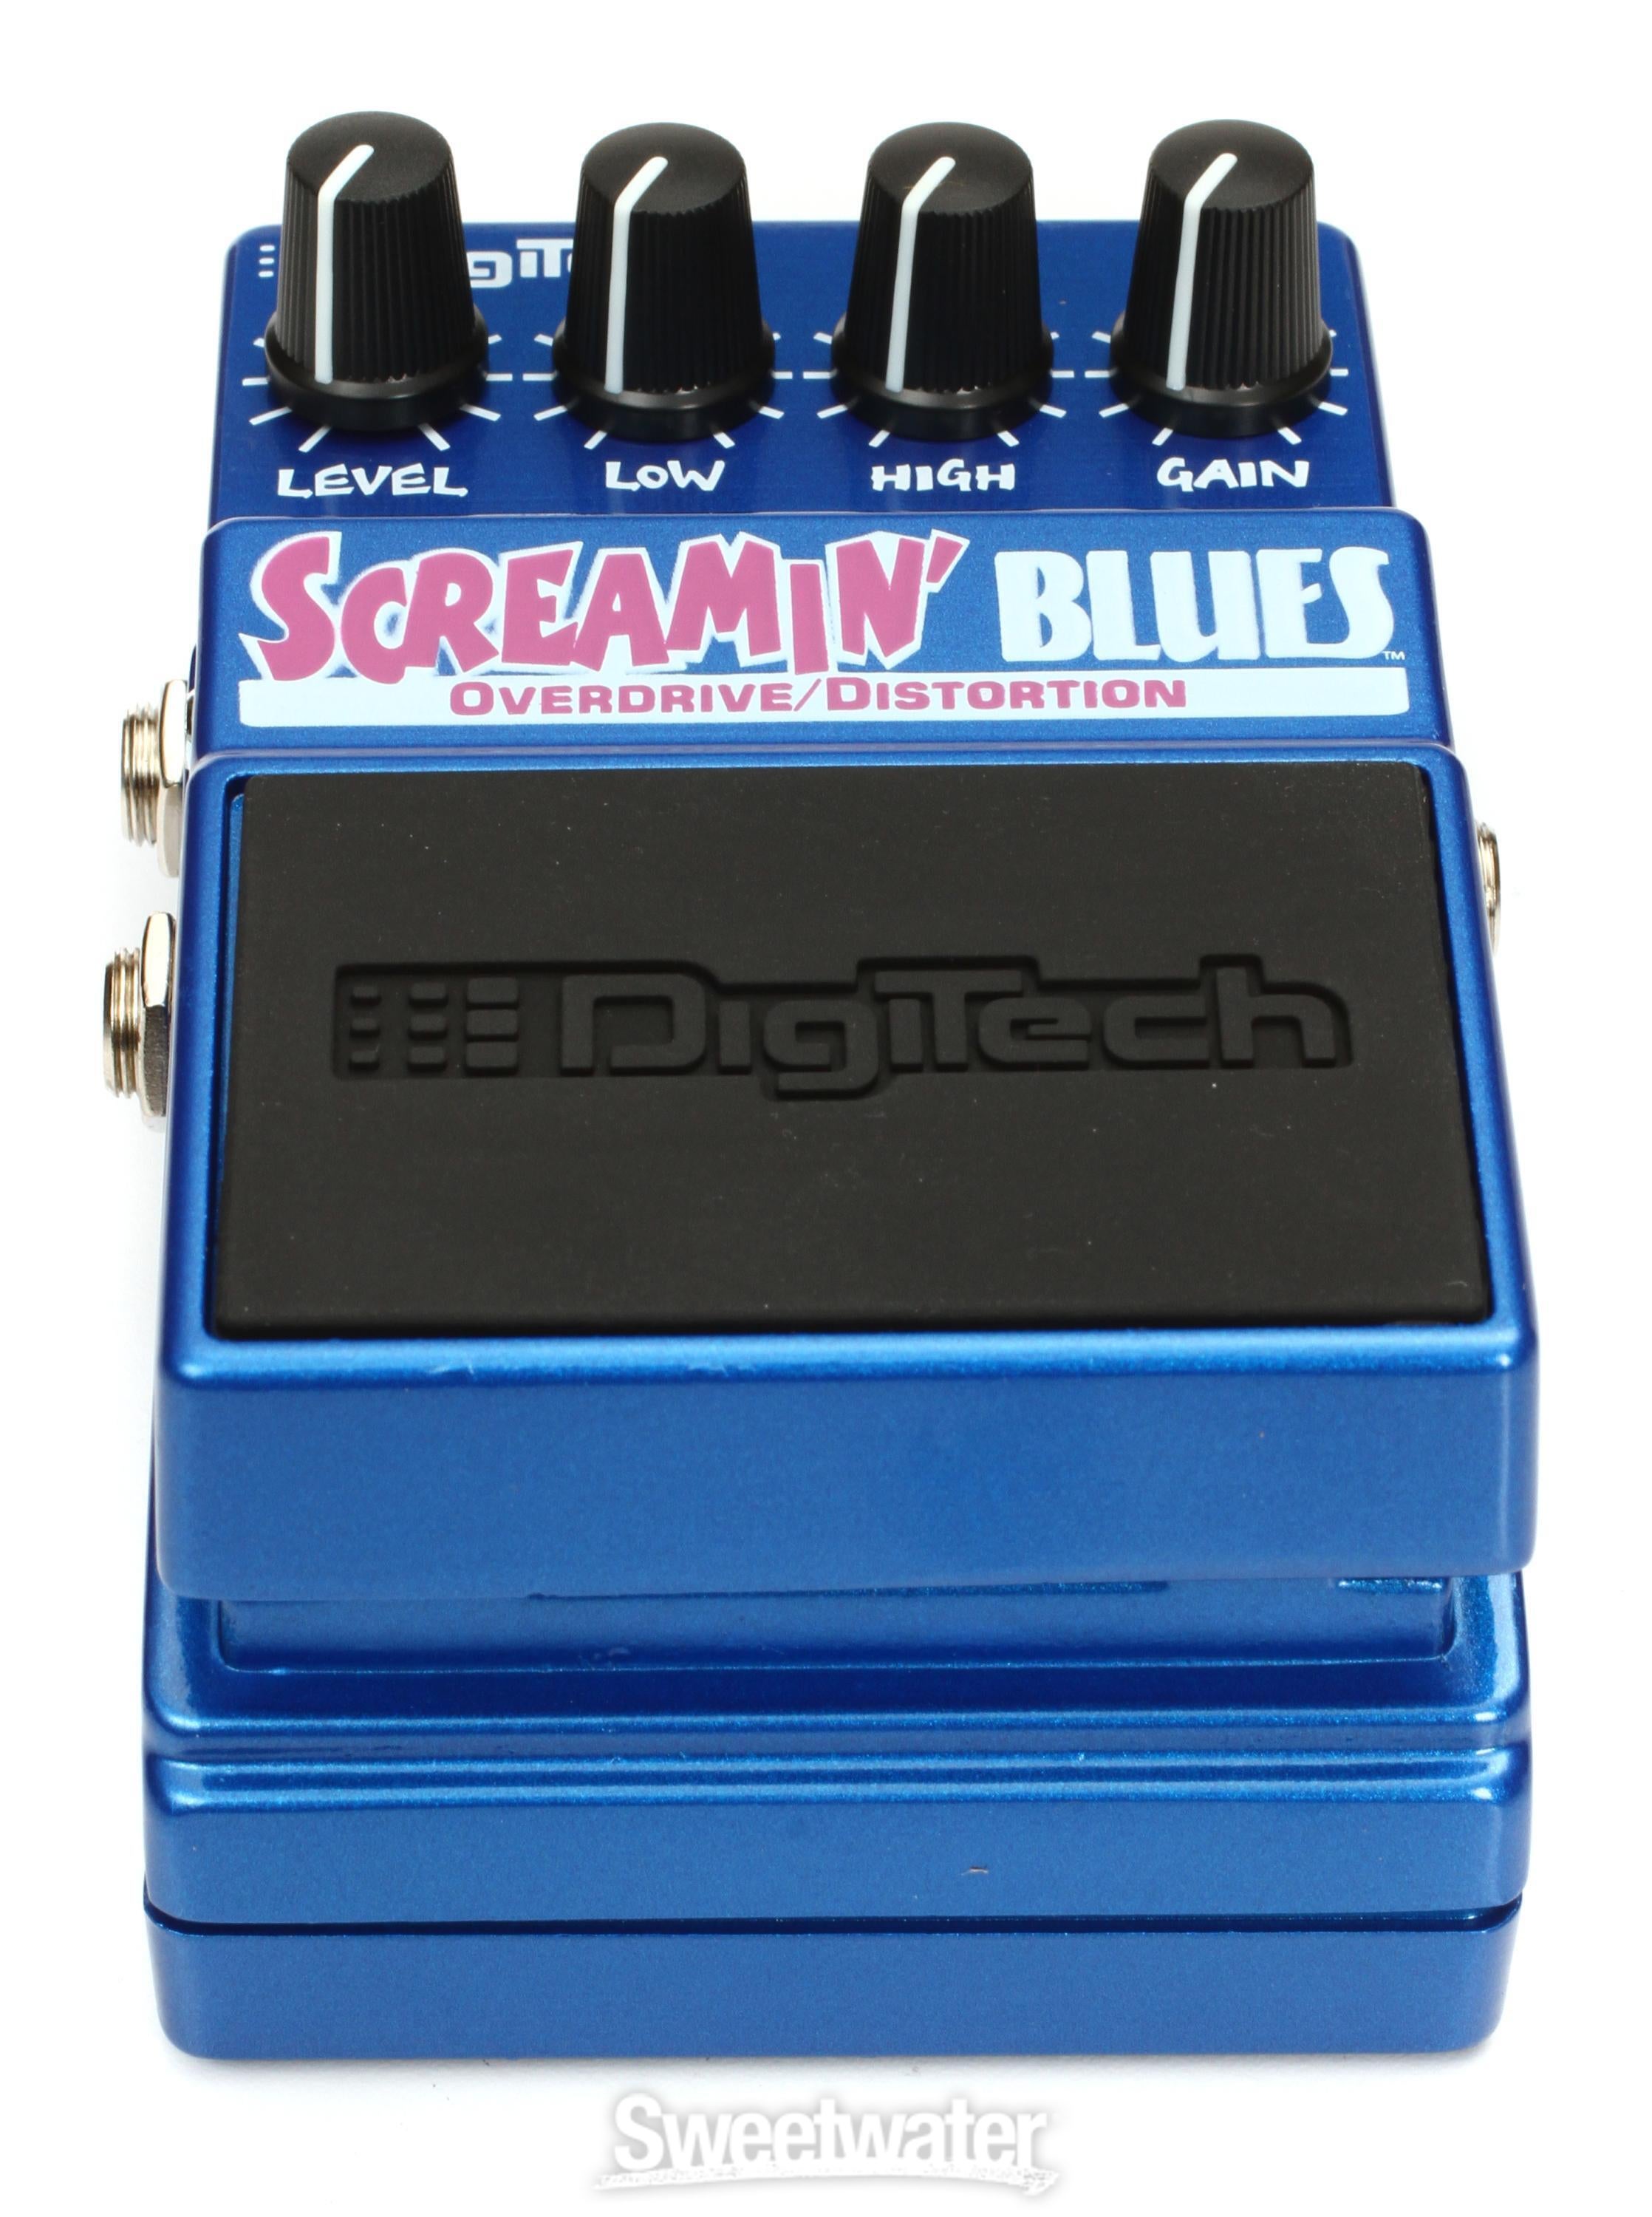 DigiTech Screamin' Blues Overdrive/Distortion | Sweetwater